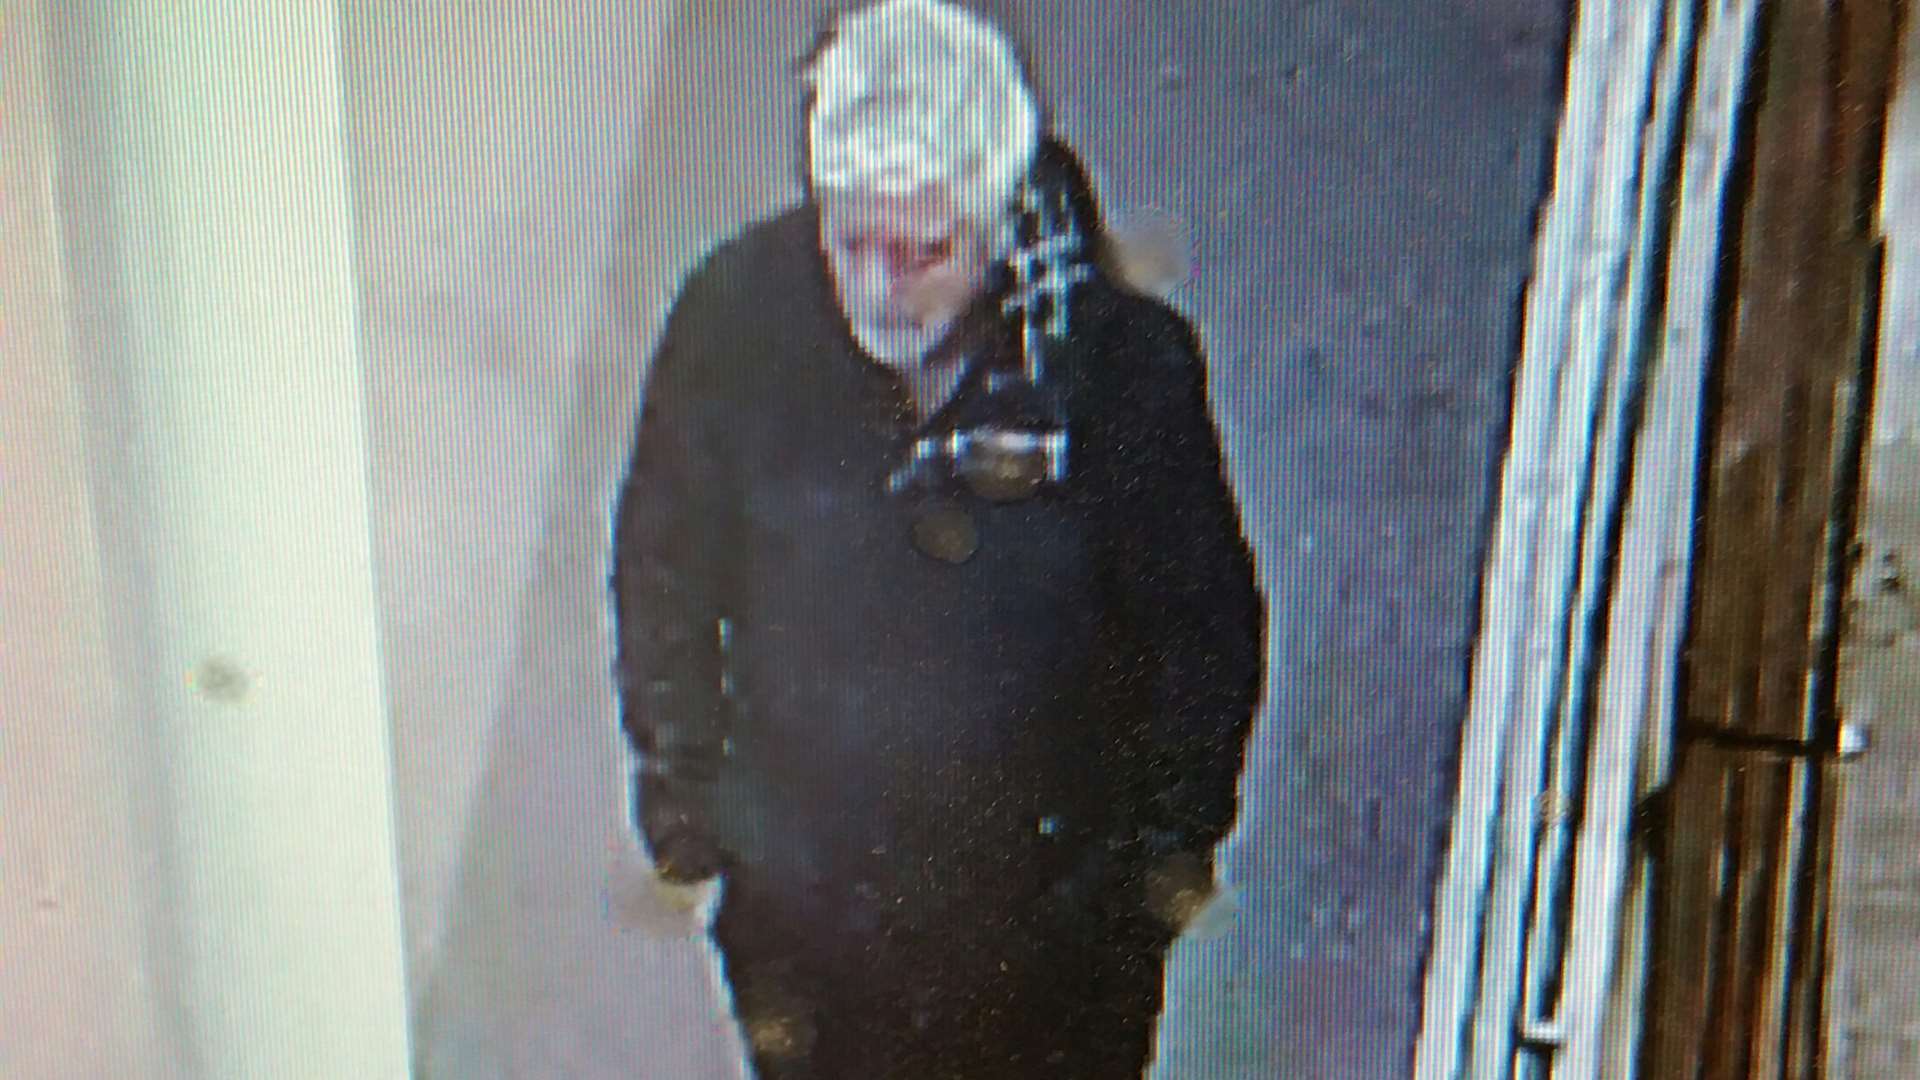 Police have released this CCTV image capturing Edward Jones near the train station yesterday